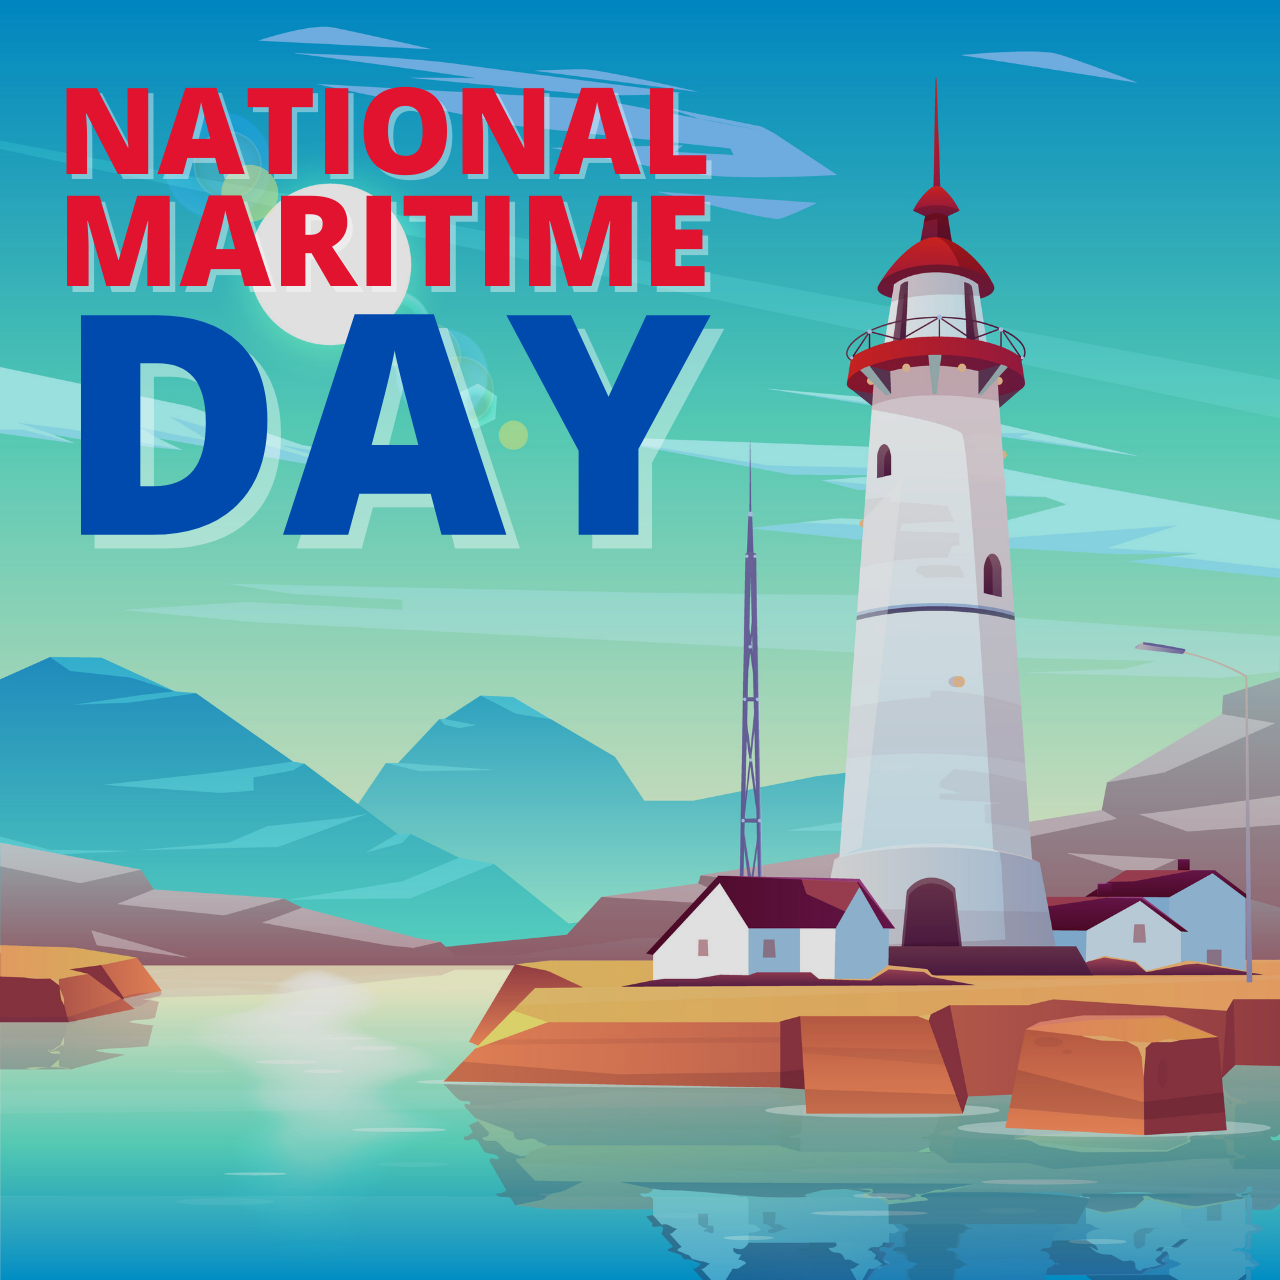 United States National Maritime Day 2021 Theme, Quotes, Slogans